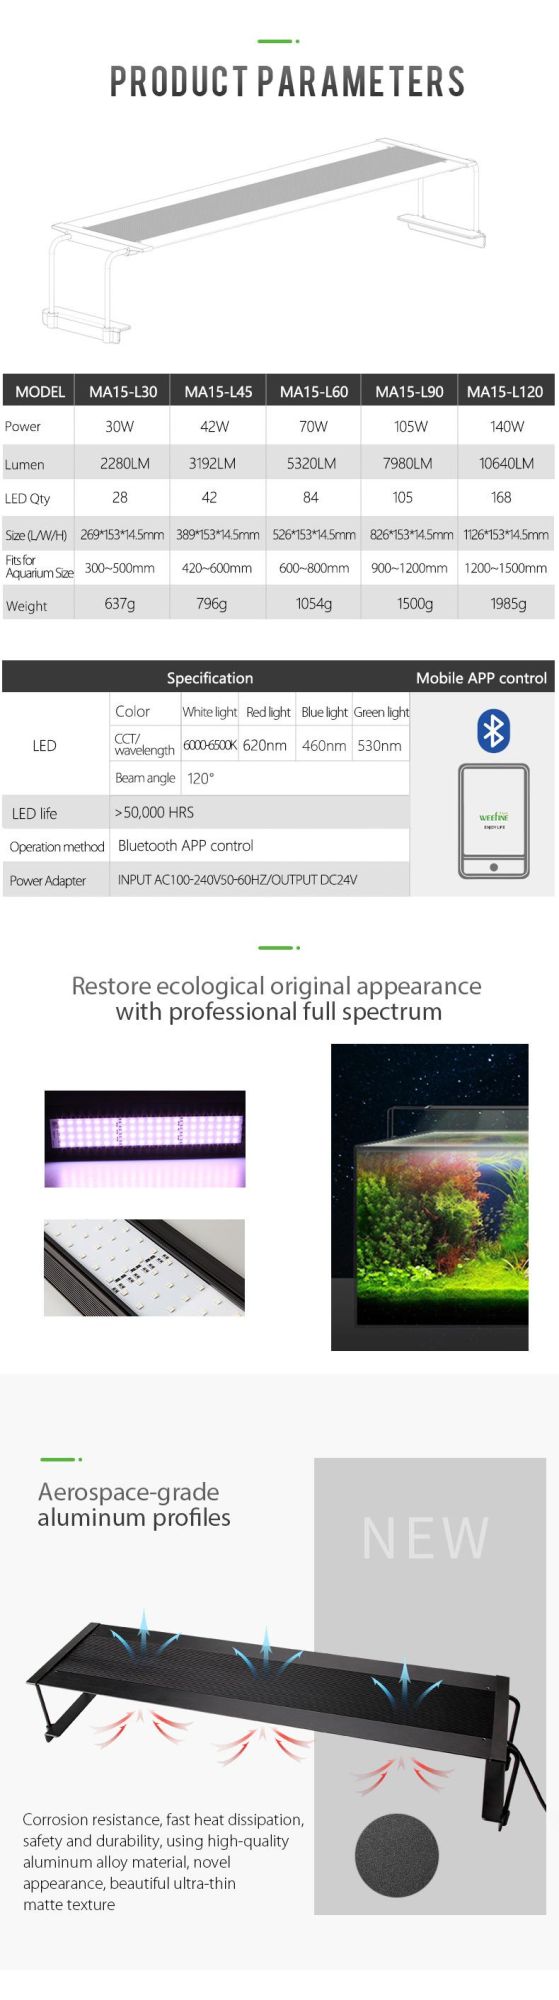 70W Programmable LED Aquarium Light for Coral Reef with Sunset and Sunrise Mode (MA15)